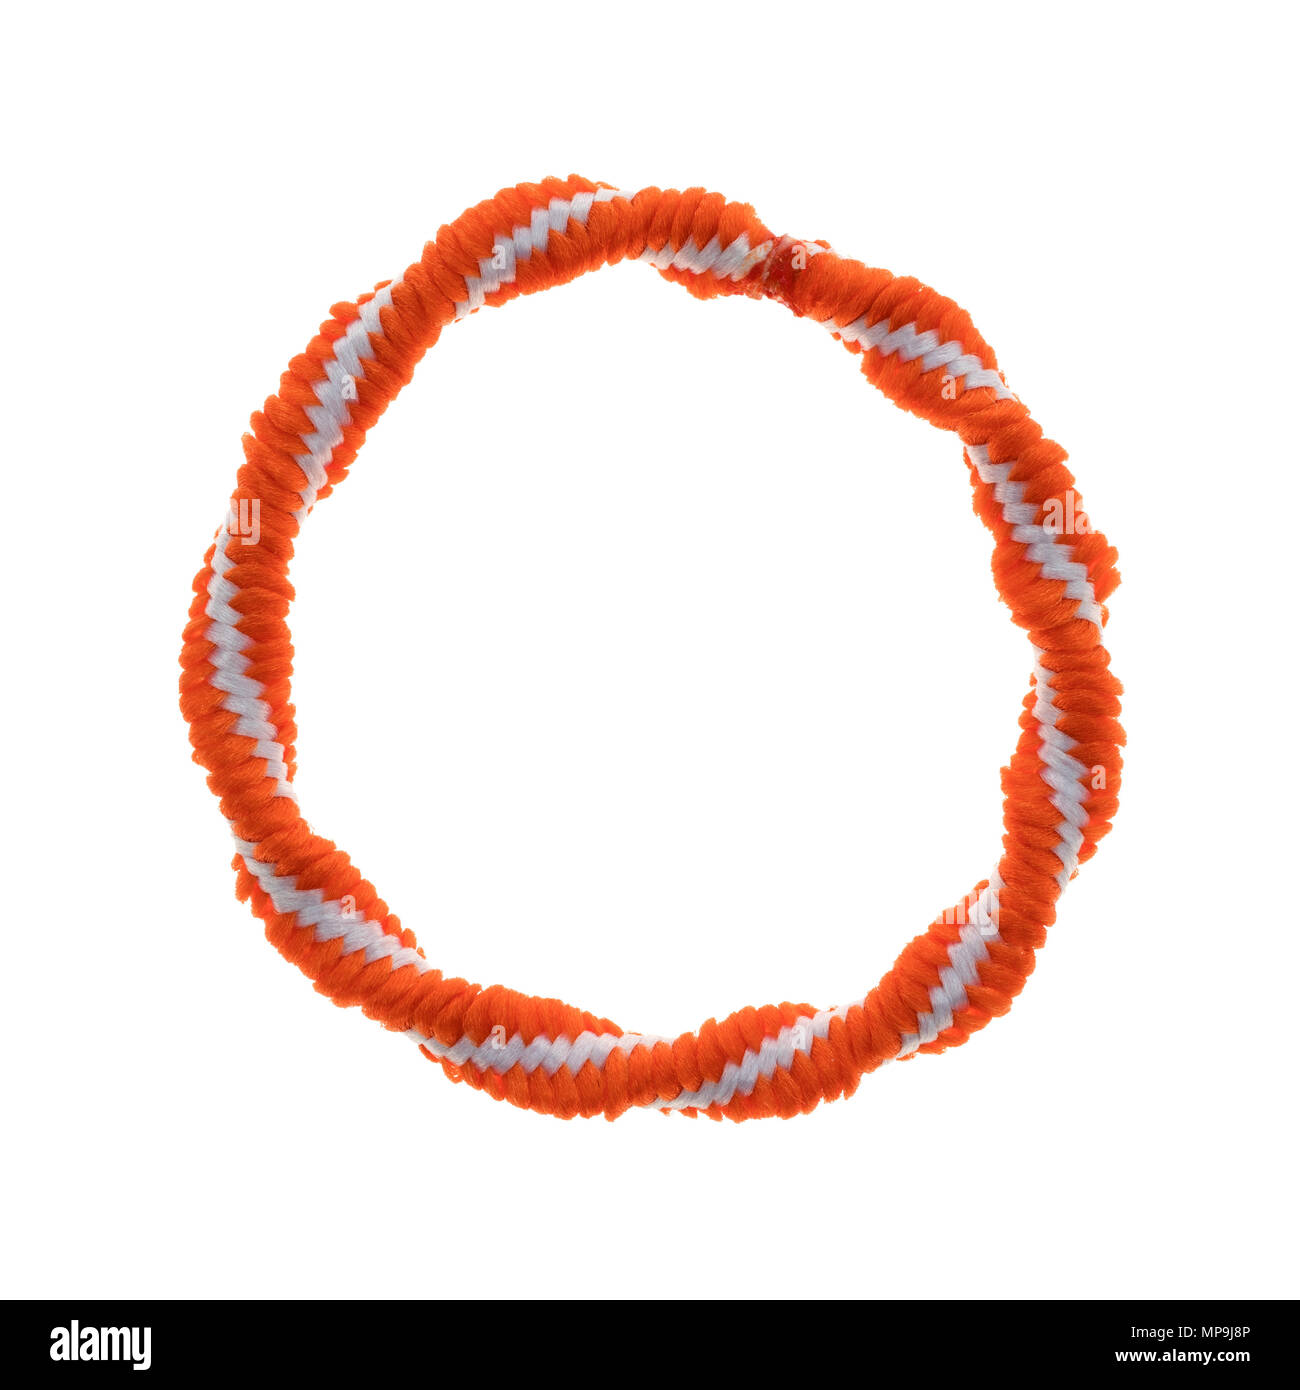 Top view of a colorful orange and white ponytail tie isolated on a white background. Stock Photo